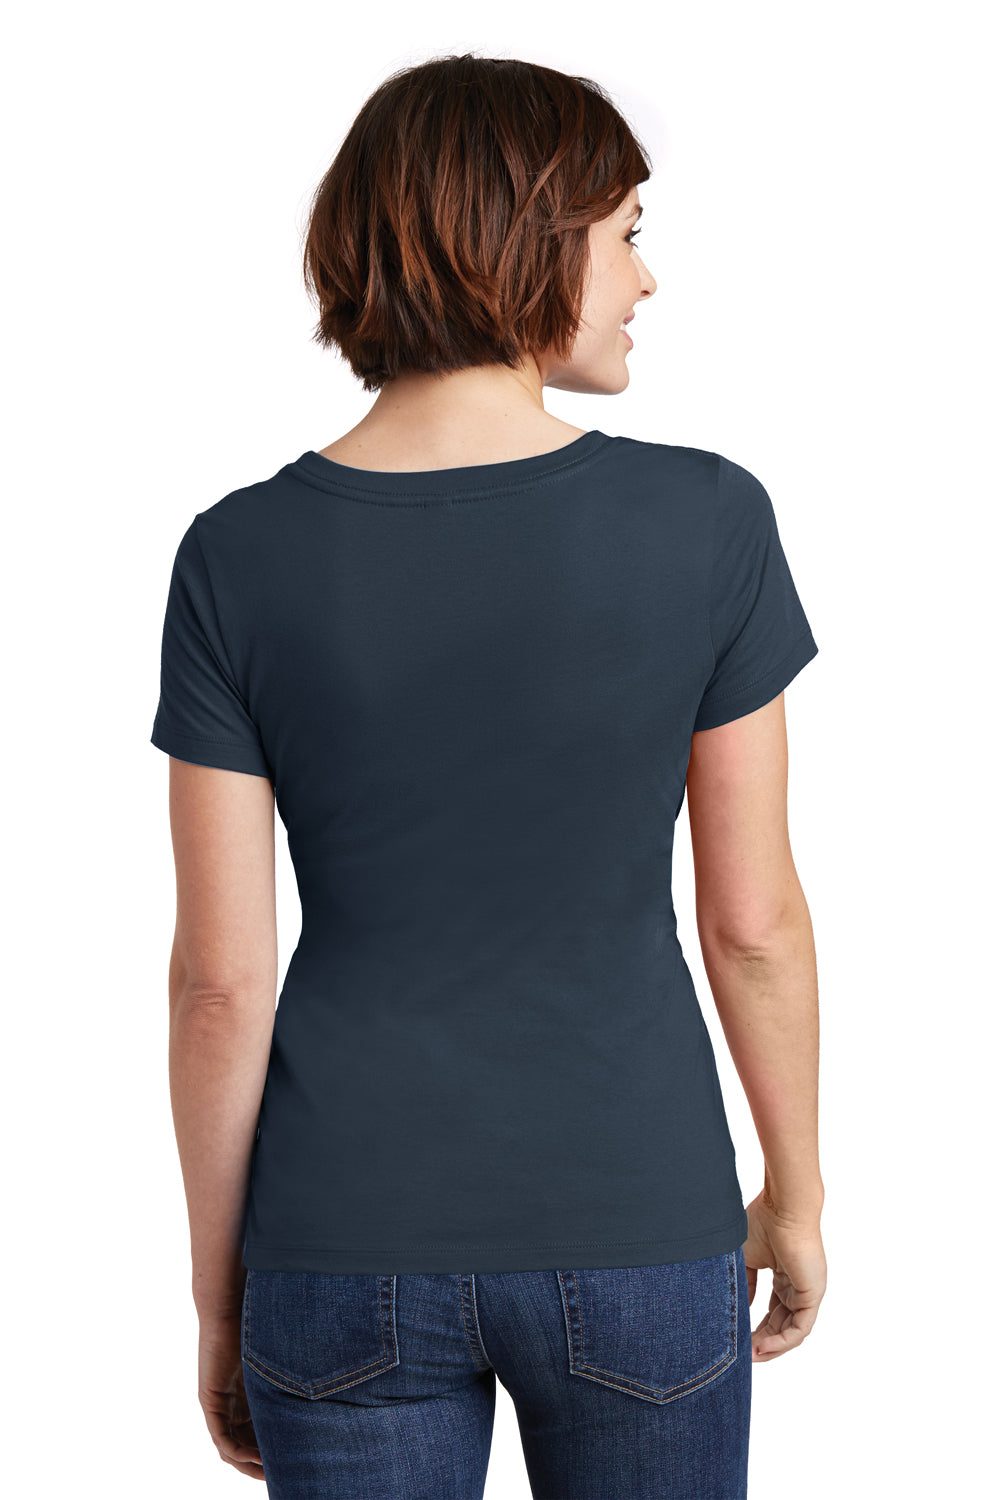 District DM106L Womens Perfect Weight Short Sleeve Scoop Neck T-Shirt Navy Blue Back